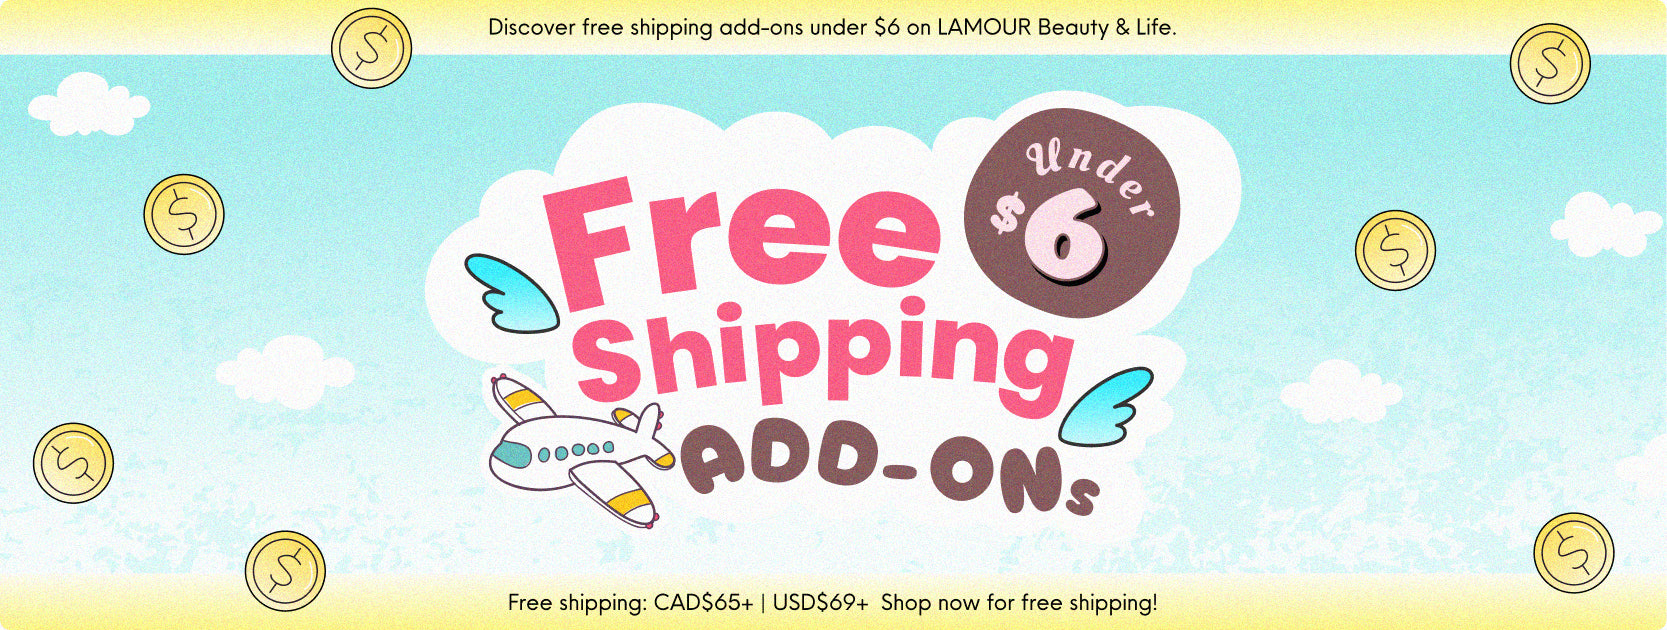 Free Shipping Add-ons under $6